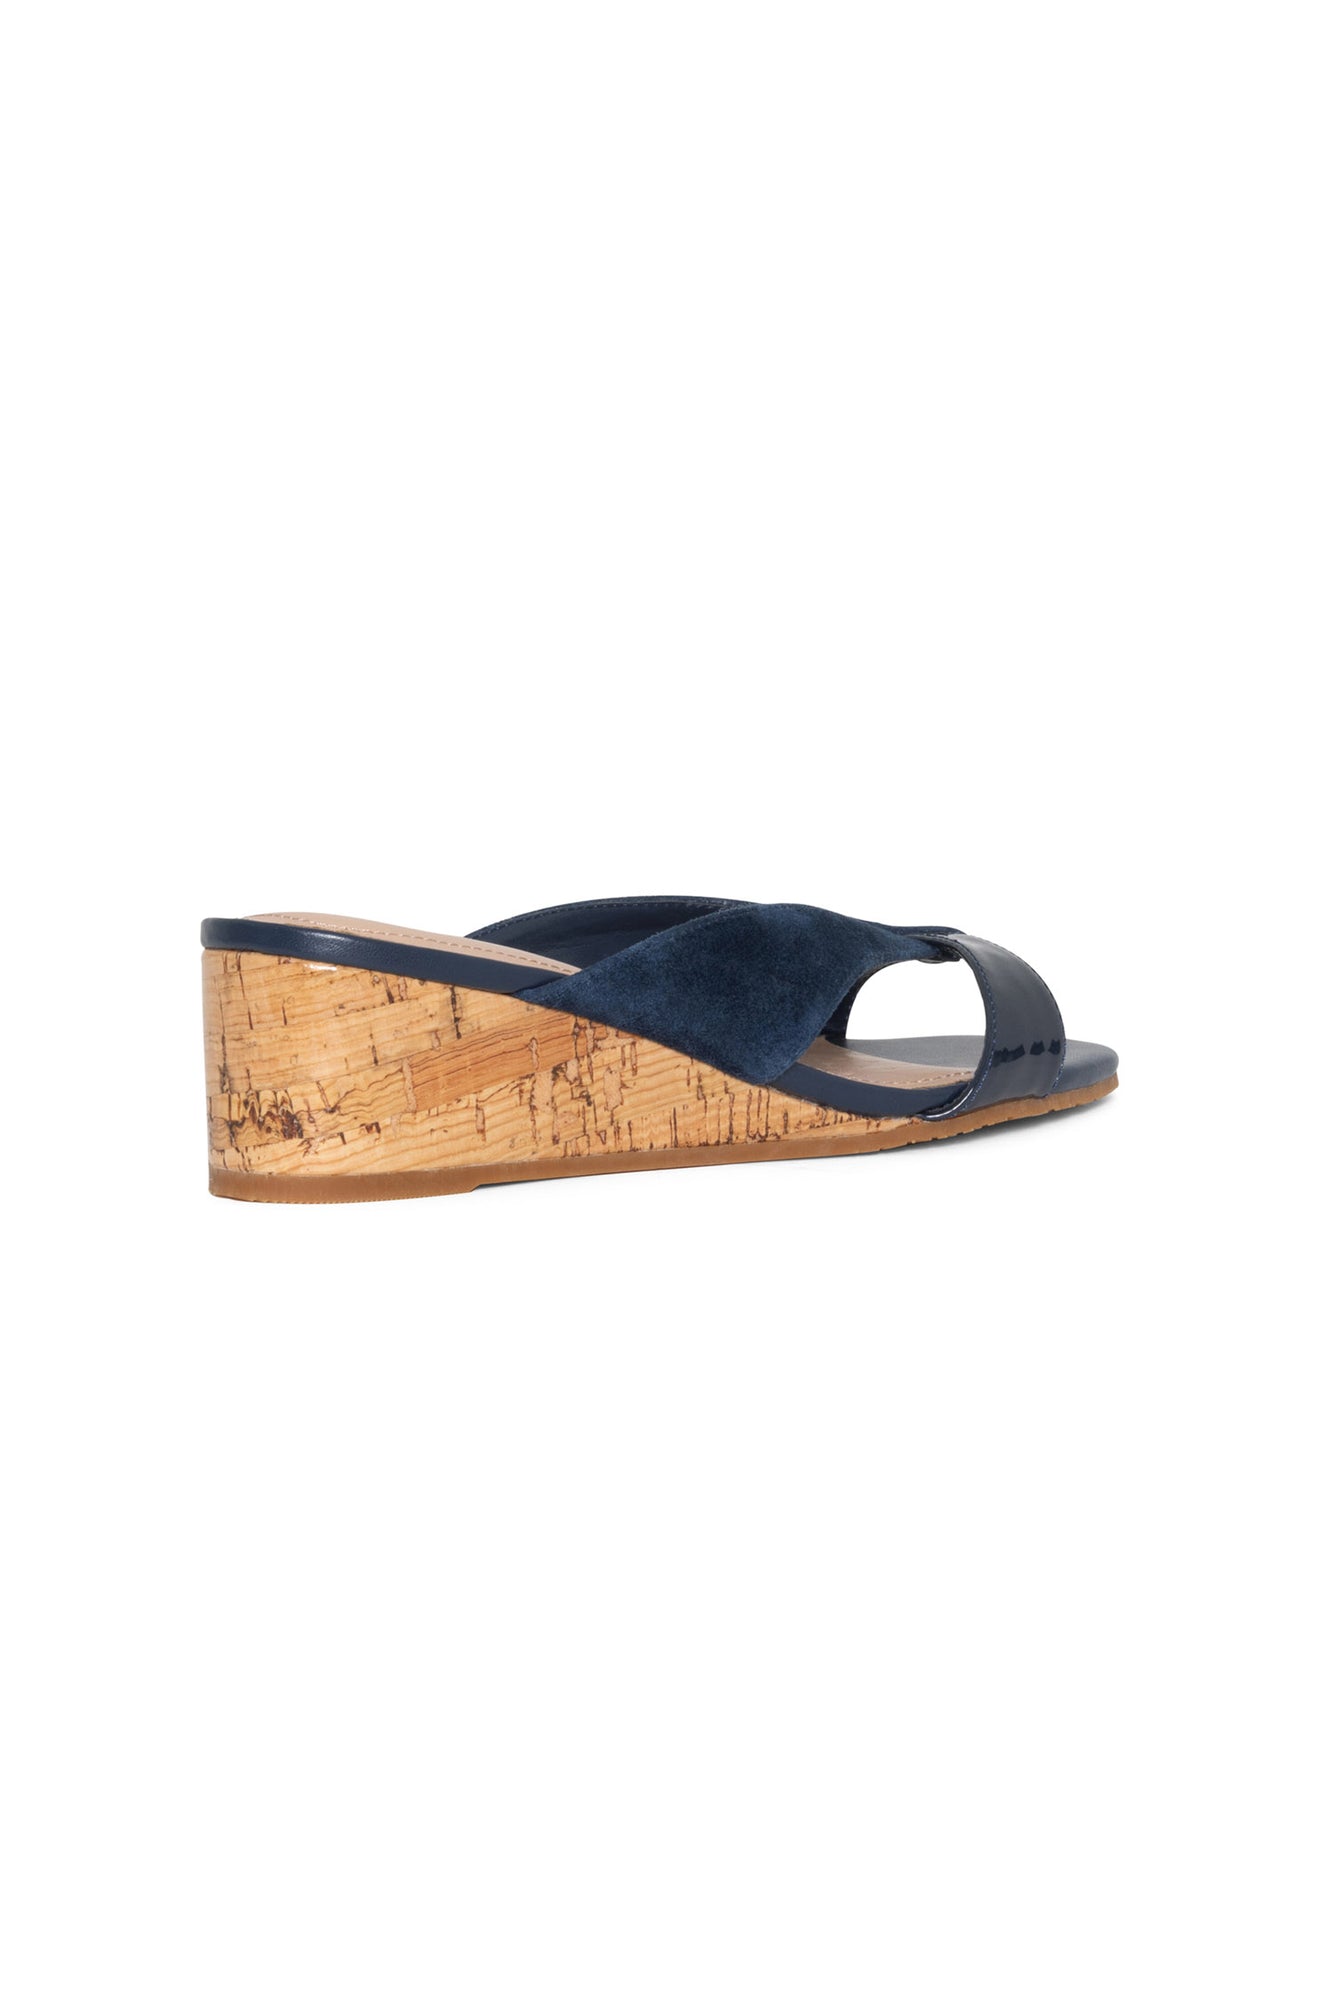 NYDJ Contessa Wedge Sandals In Suede And Patent Leather - Navy